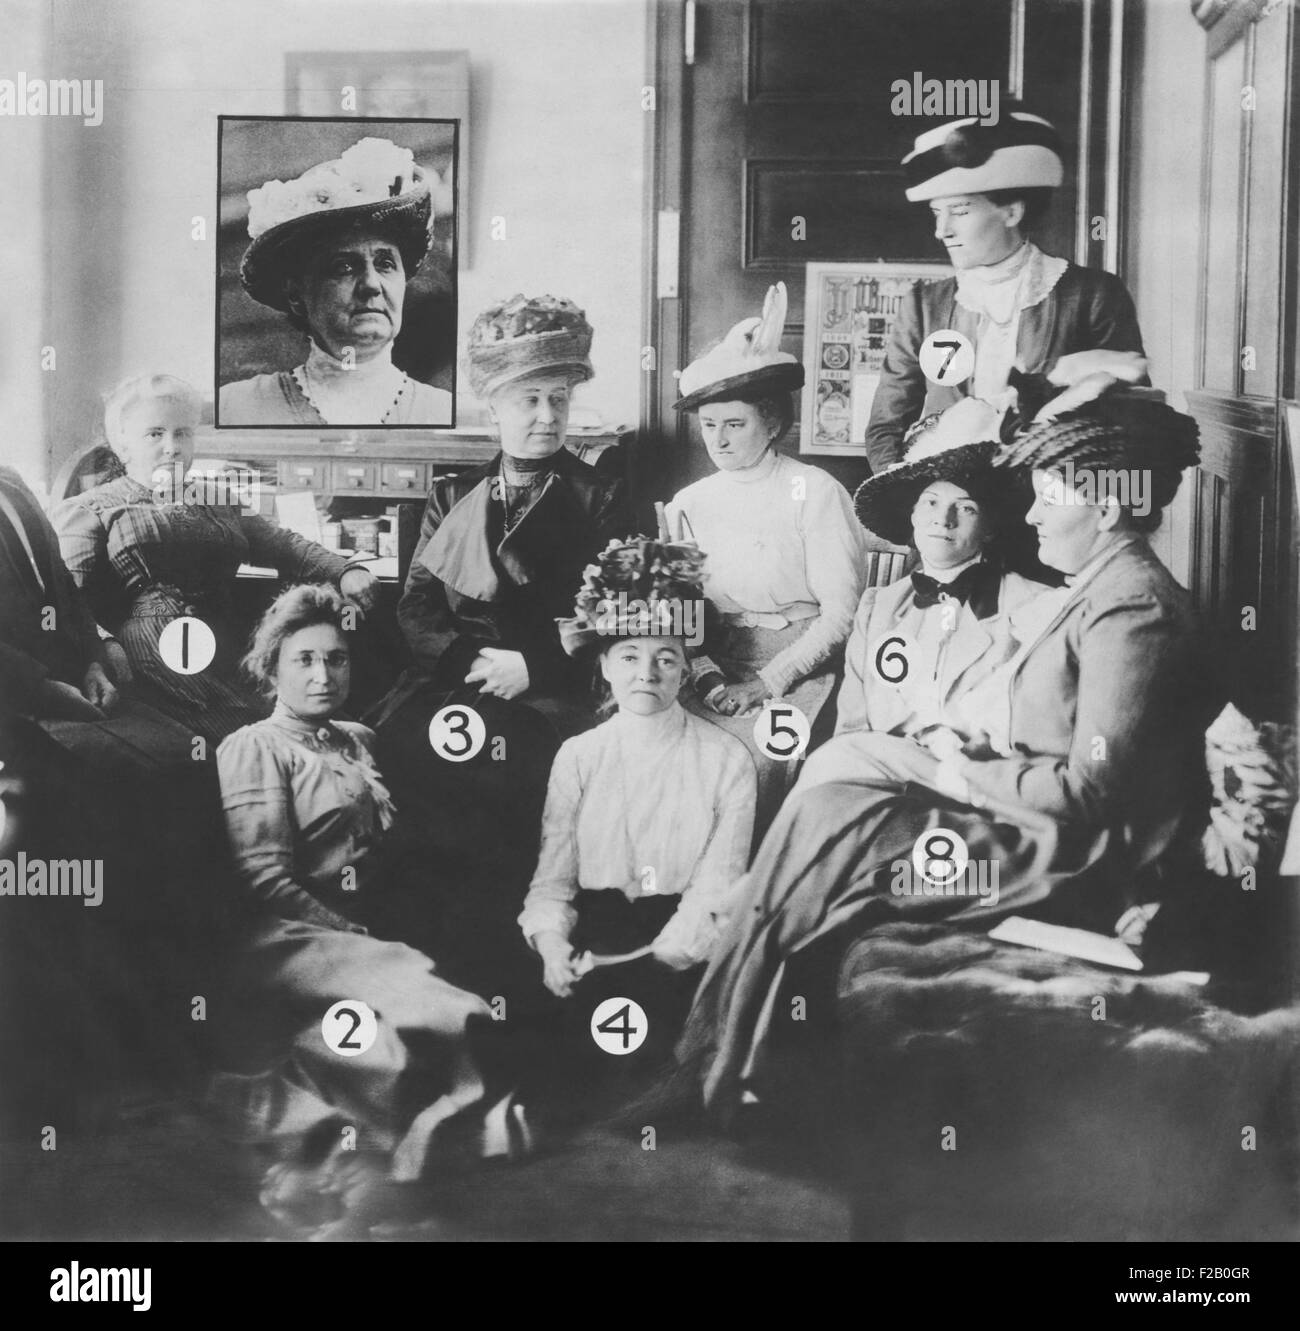 Women attending the National Convention of the Woman Suffrage Association. Philadelphia, Nov. 21 -26, 1912. 1 Dr. Anna Howard Shaw, President. 2 Mrs. William M. Ivins. 3  Miss Lucy Anthony. 4 Donald Booker, Baltimore. 5 Katharine Hepburn, Hartford, Connecticut. 6  Mary Ware Dennett, Treasurer. 7 Susan Fitzgerald, Boston. 8 Jesse Ashley, Secretary. Inset square Jane Addams. (CSU 2015 9 1125) Stock Photo